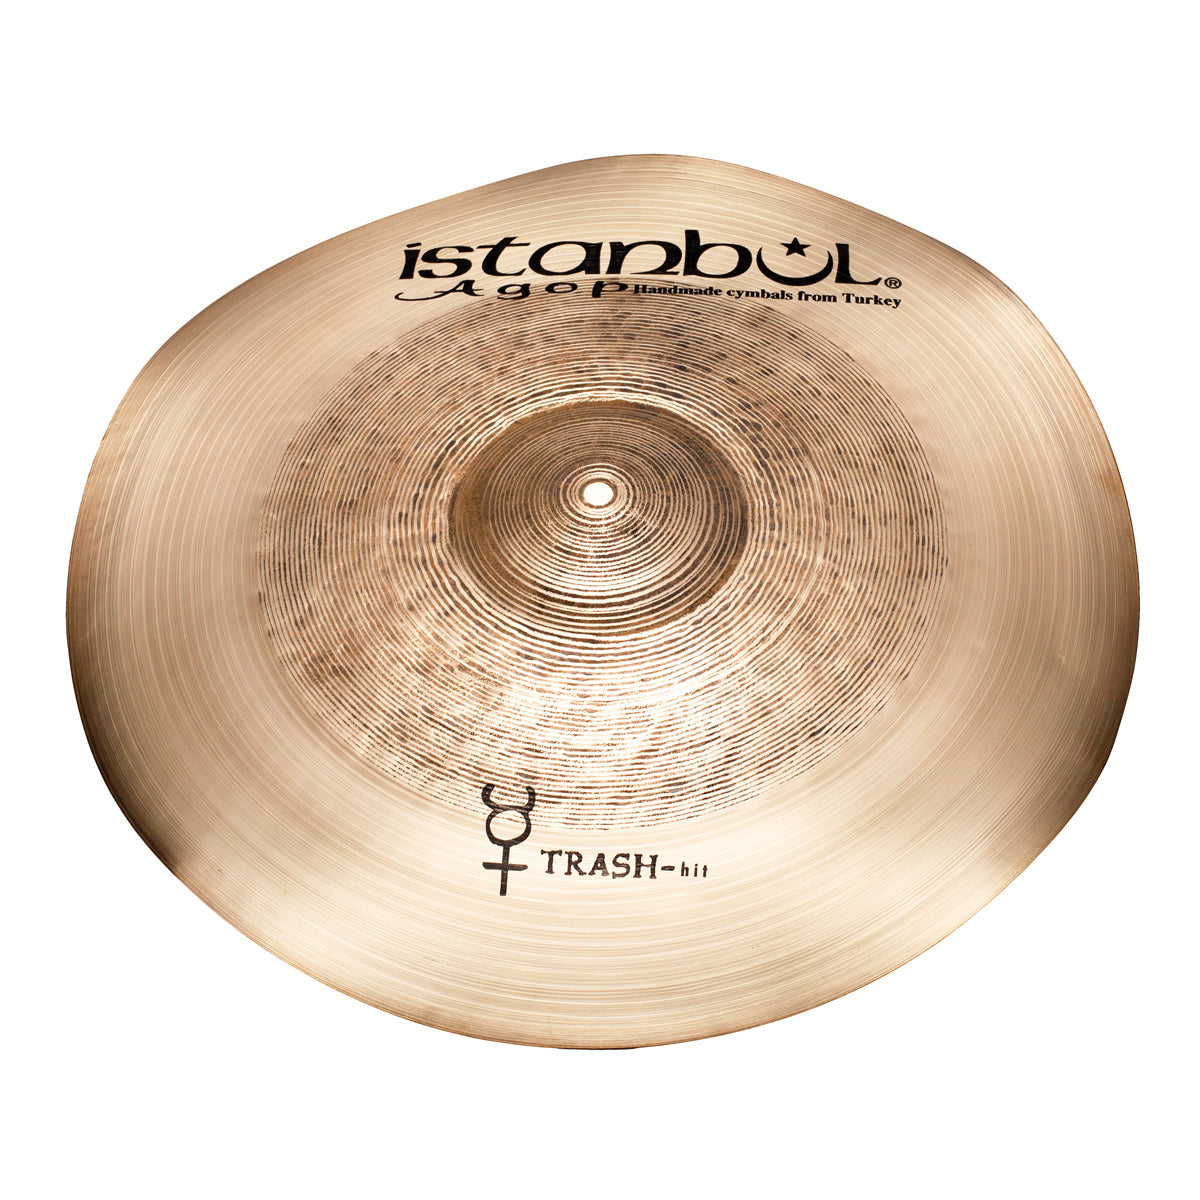 Istanbul Agop Traditional 20" Trash Hit